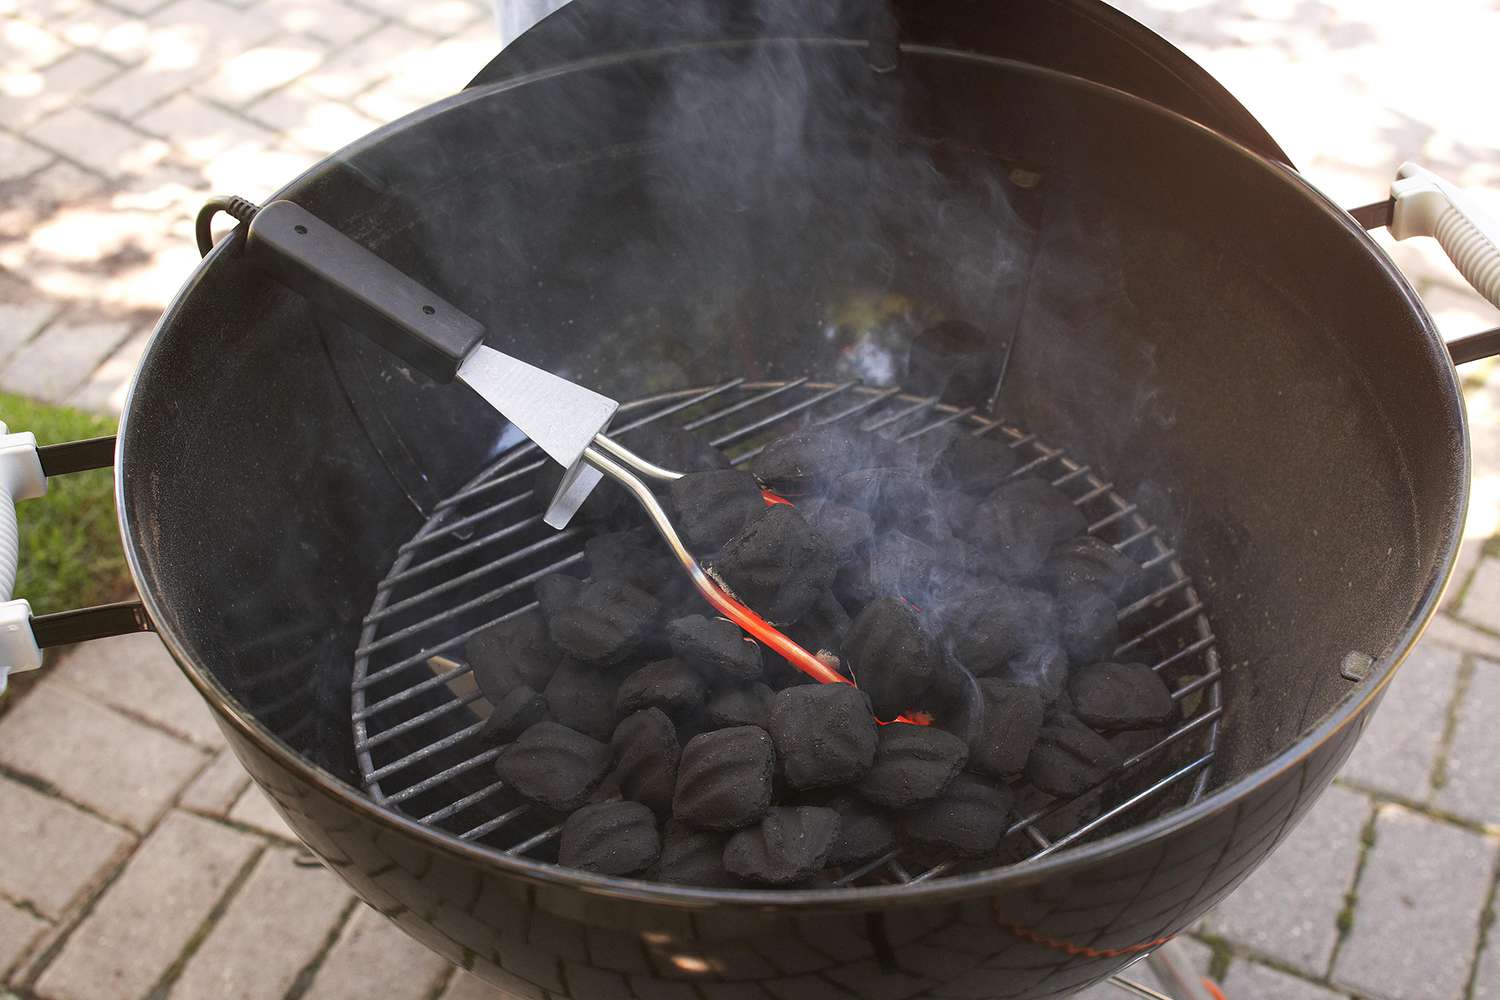 using electric starting to light charcoal grill